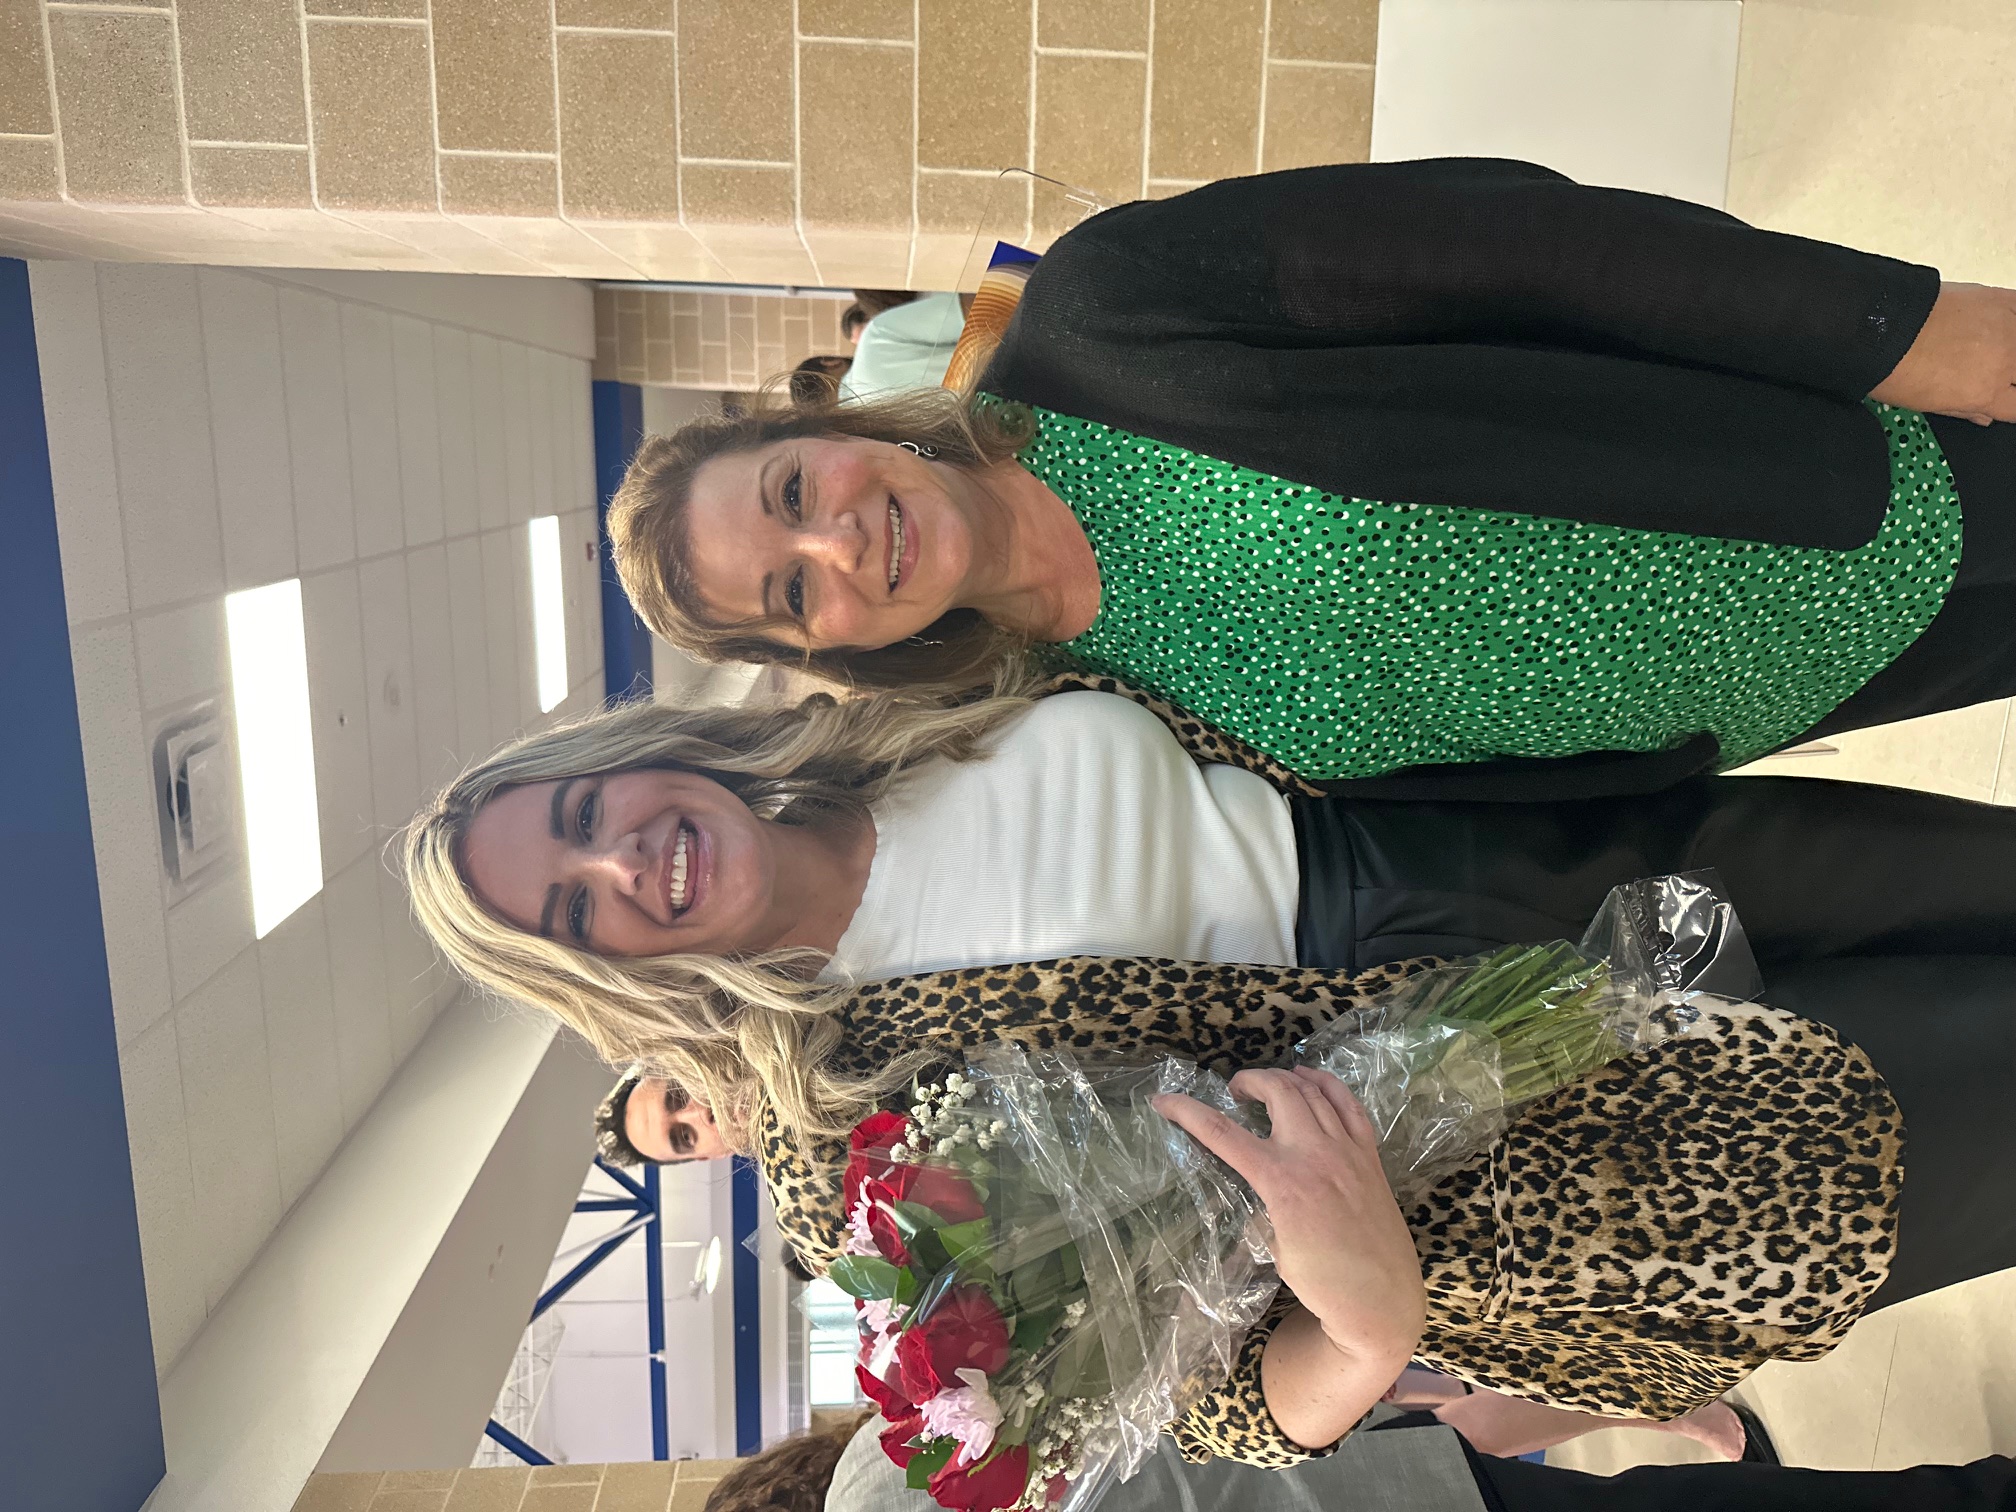 Ms. Tomich, Teach of the Year with the School Principal, Ms. Cabico